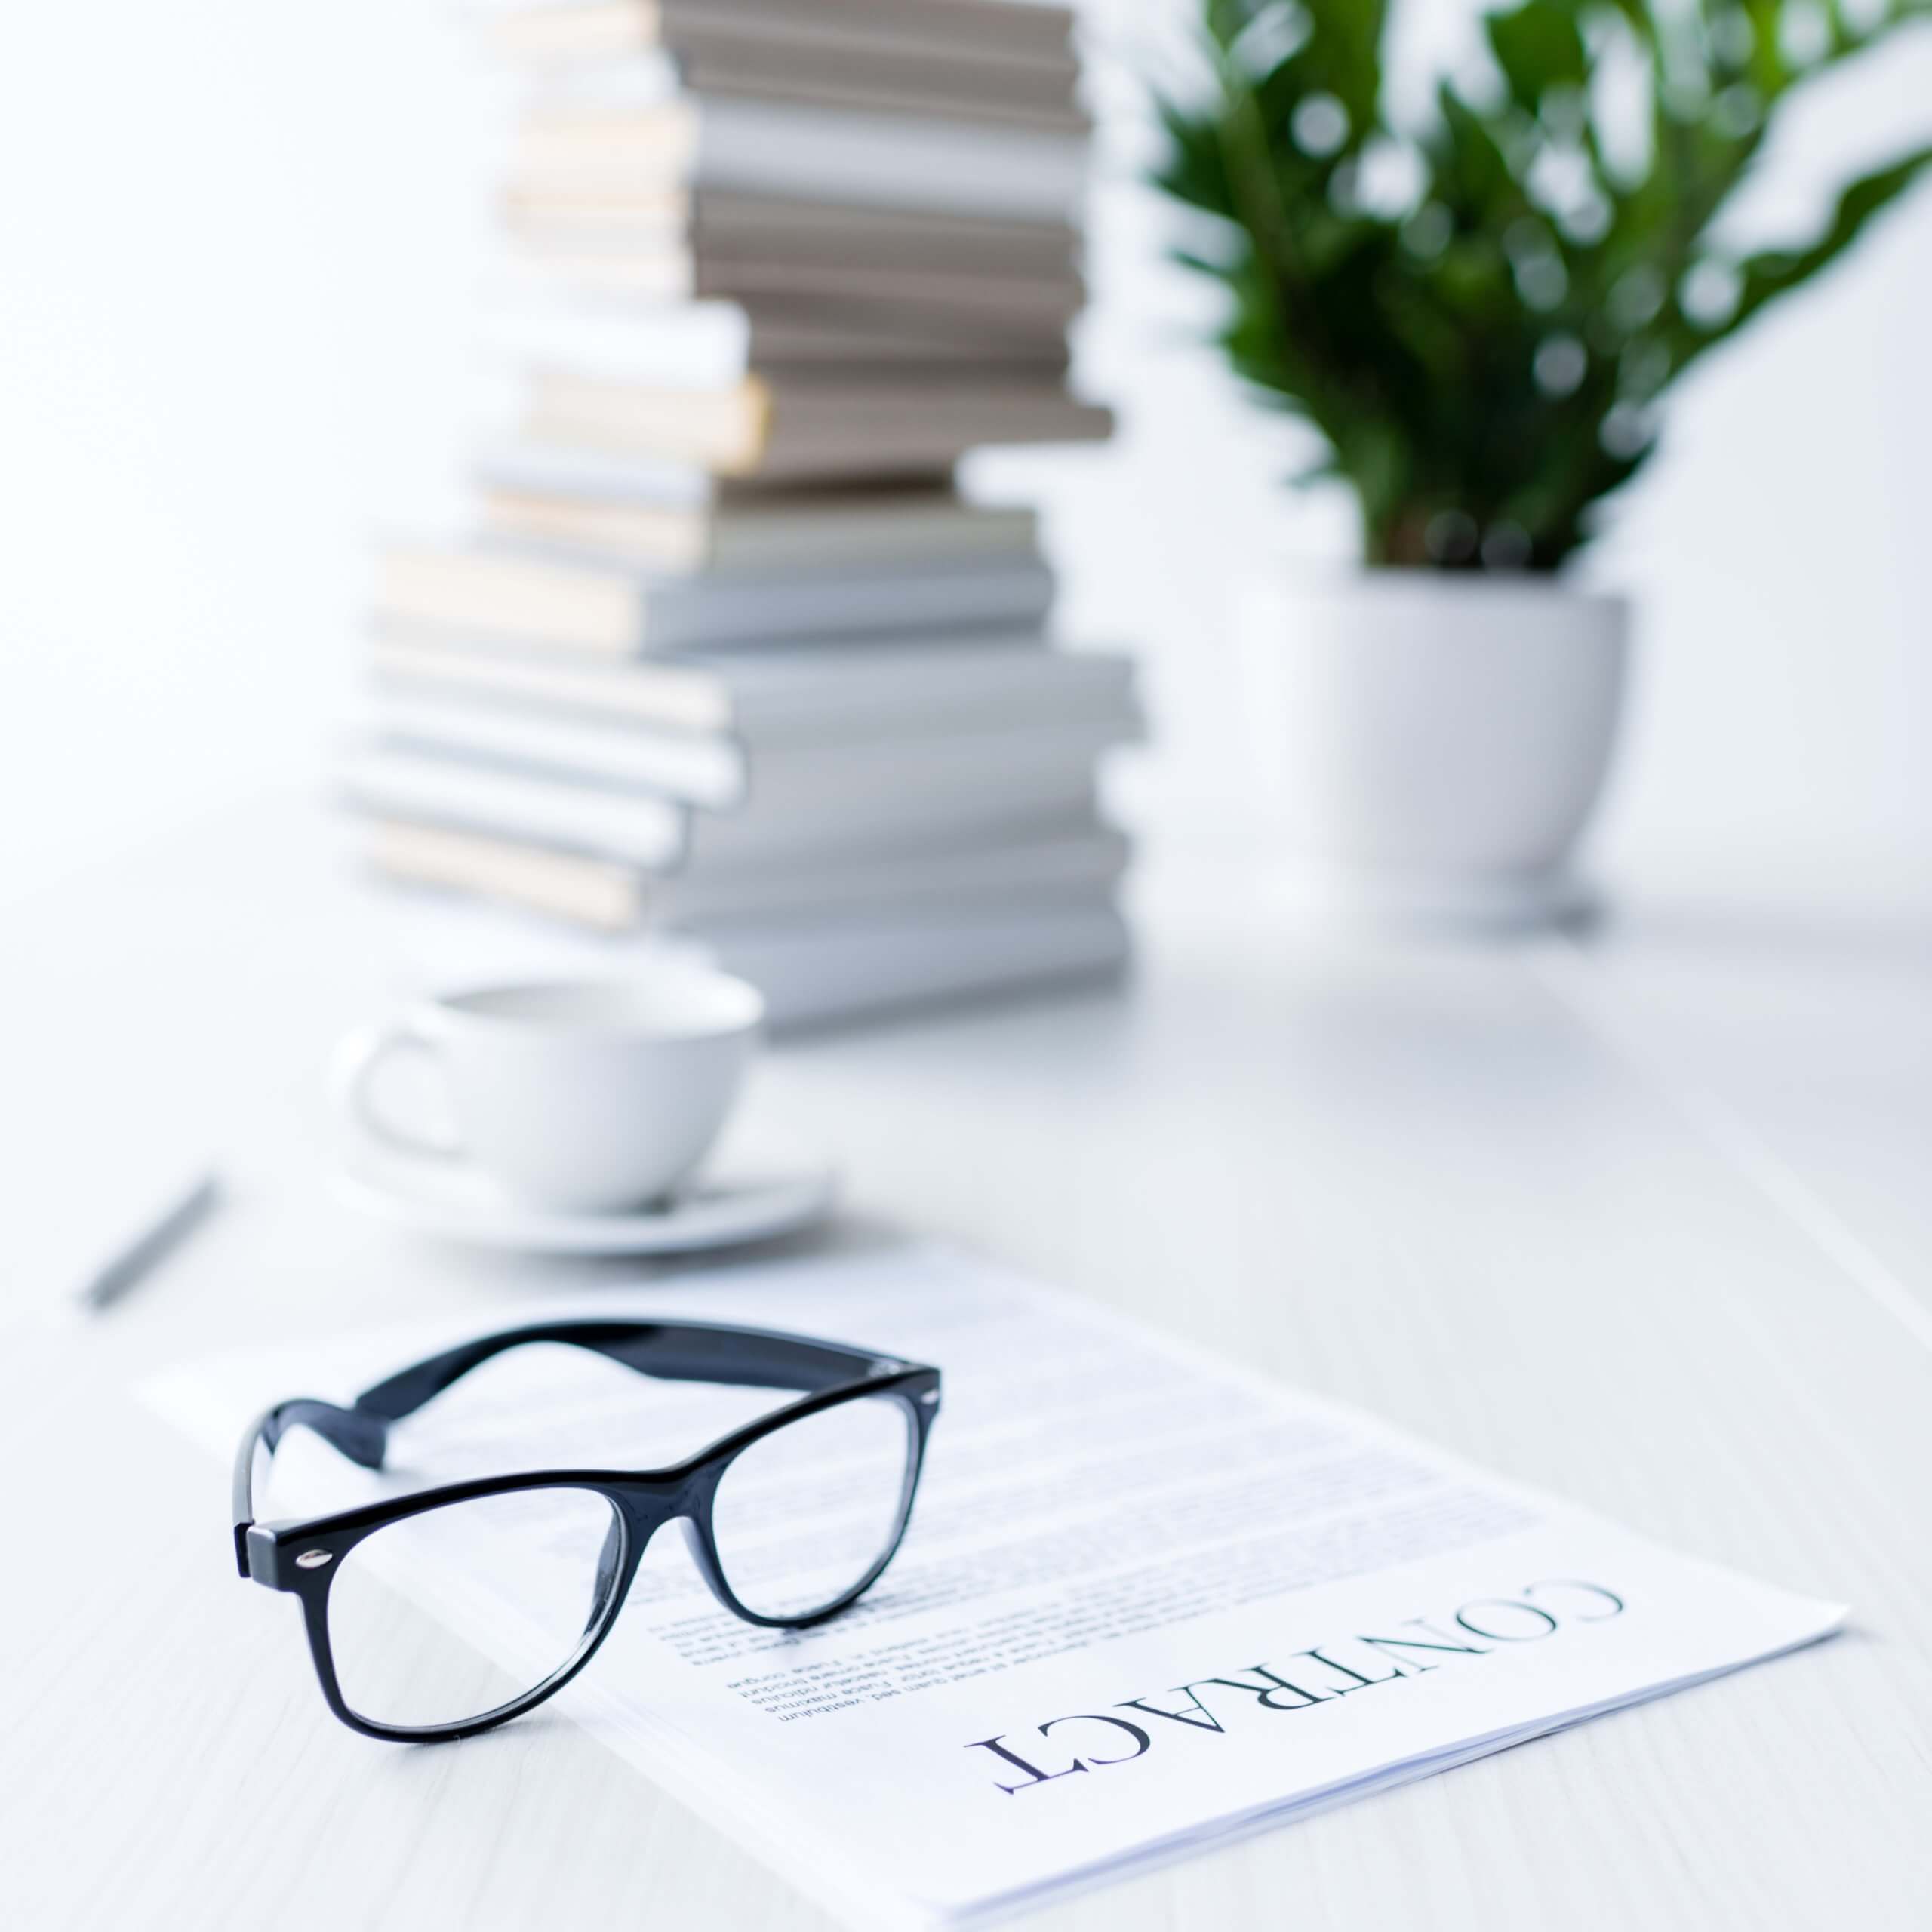 An image of a set of glasses on a table, a stack of books and a plan behind. A visual metaphor for the topic of this post: Labour's employment reform pledges.